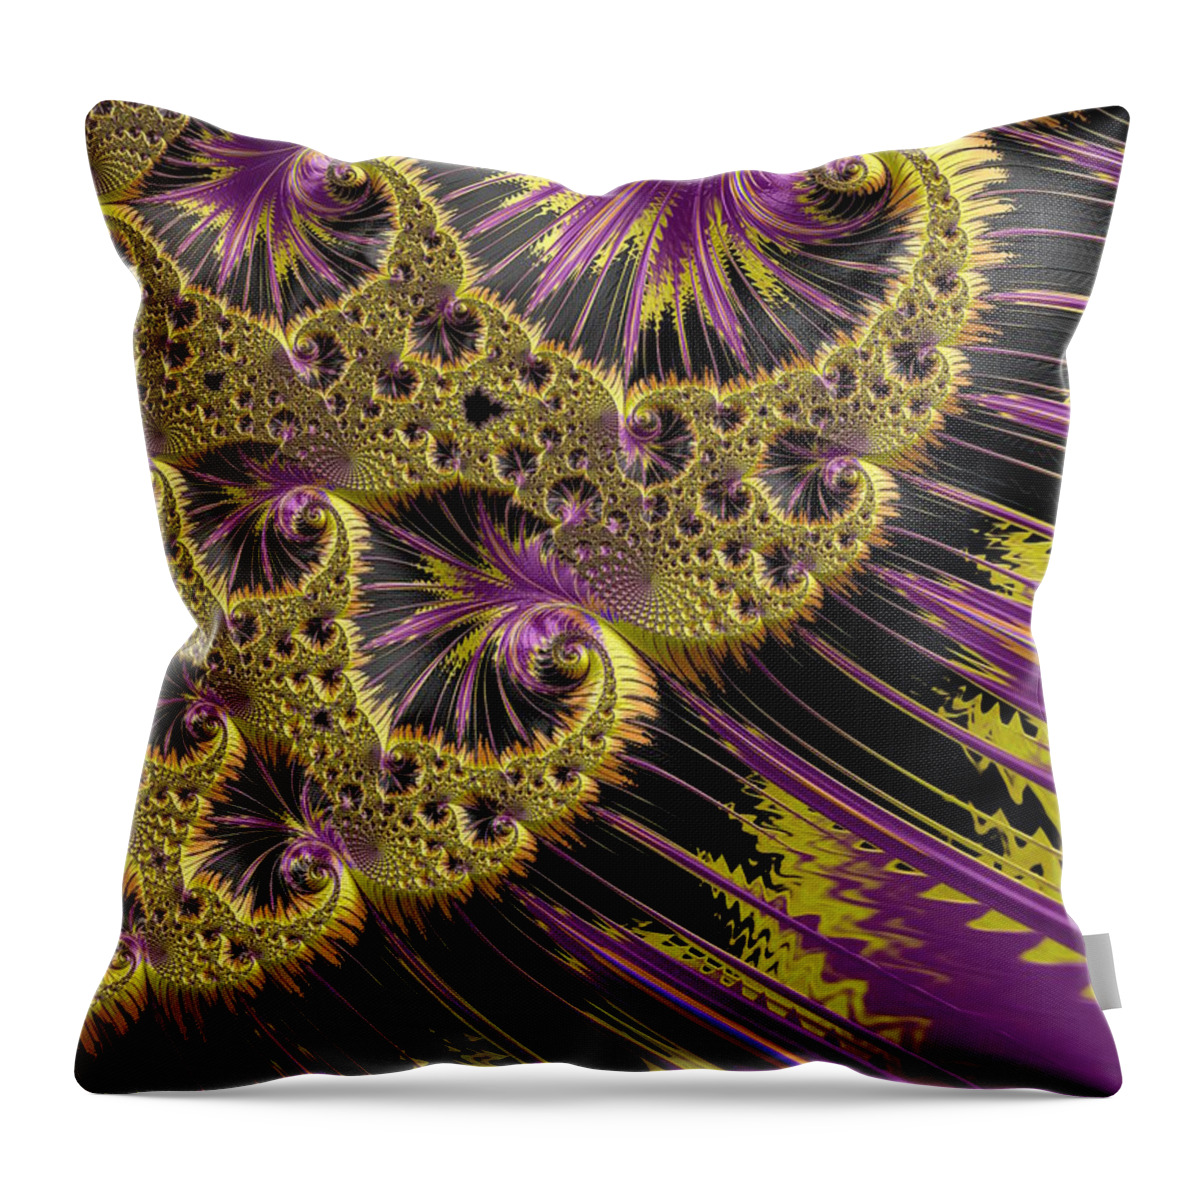 Fractals Throw Pillow featuring the digital art All That Glitters by Becky Herrera